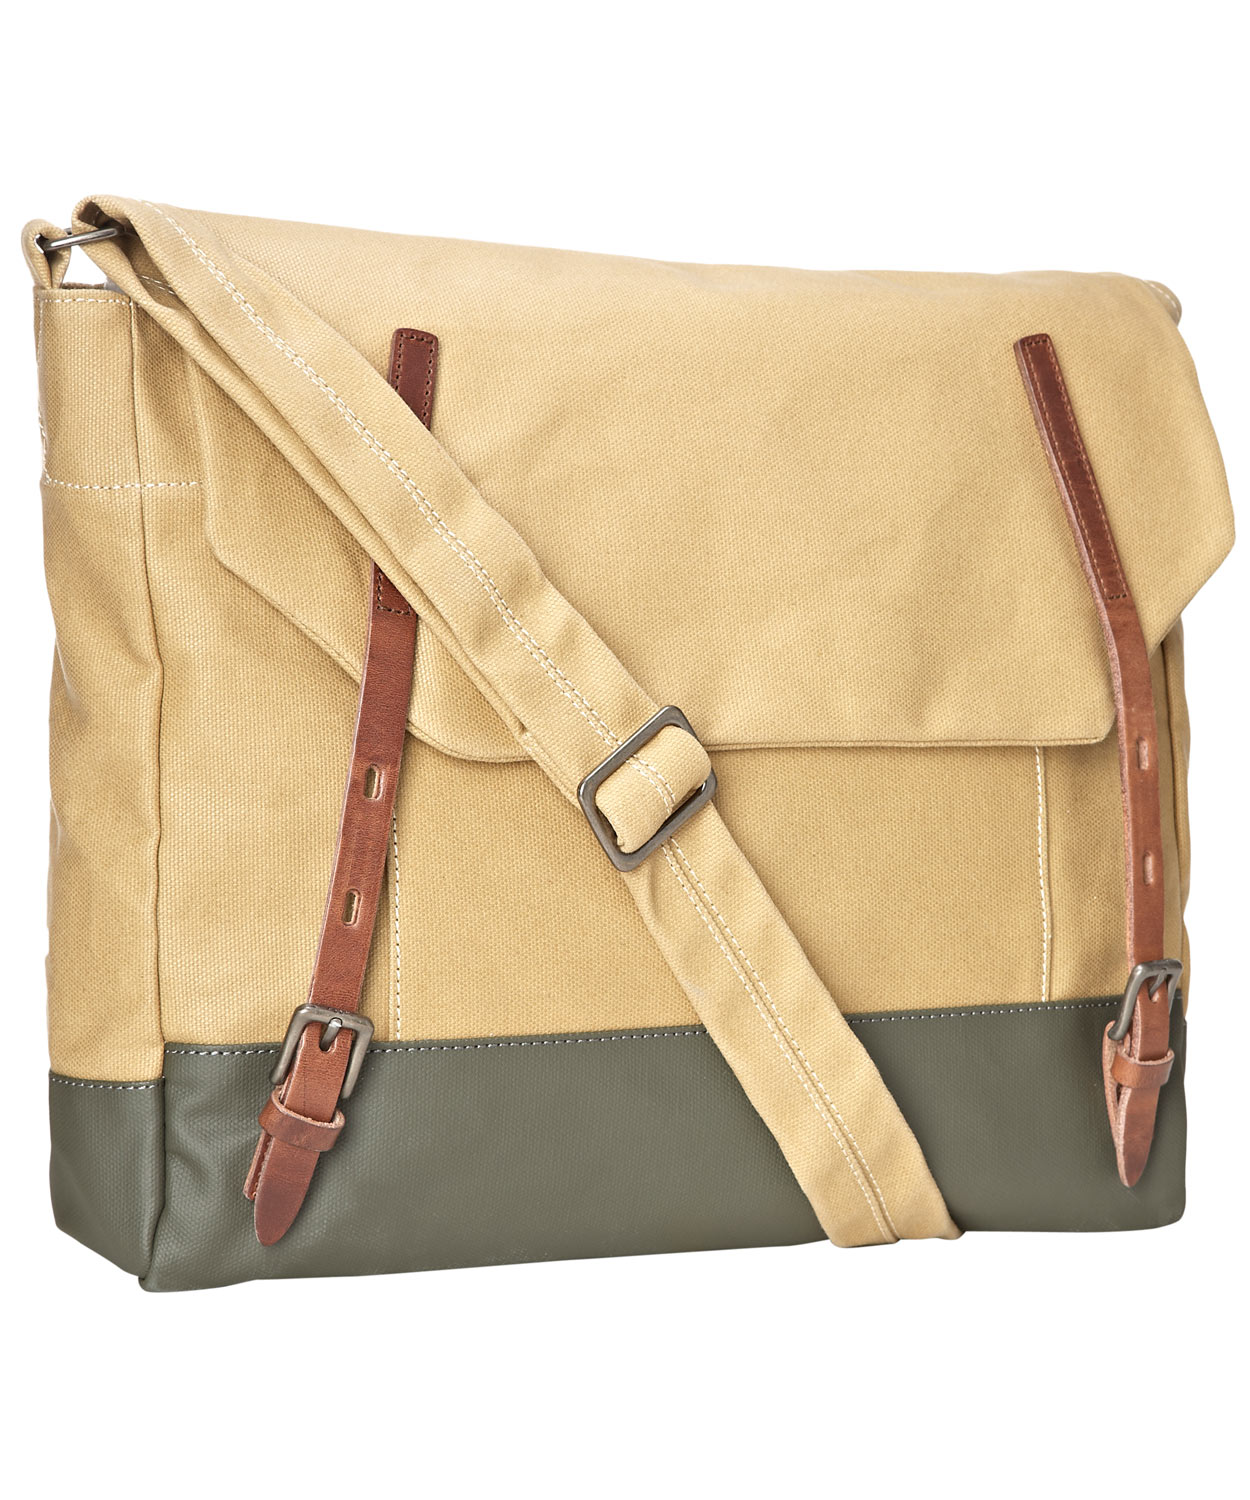 Lyst - Ally Capellino Beige Danny Waxed Canvas Messenger Bag in Natural for Men